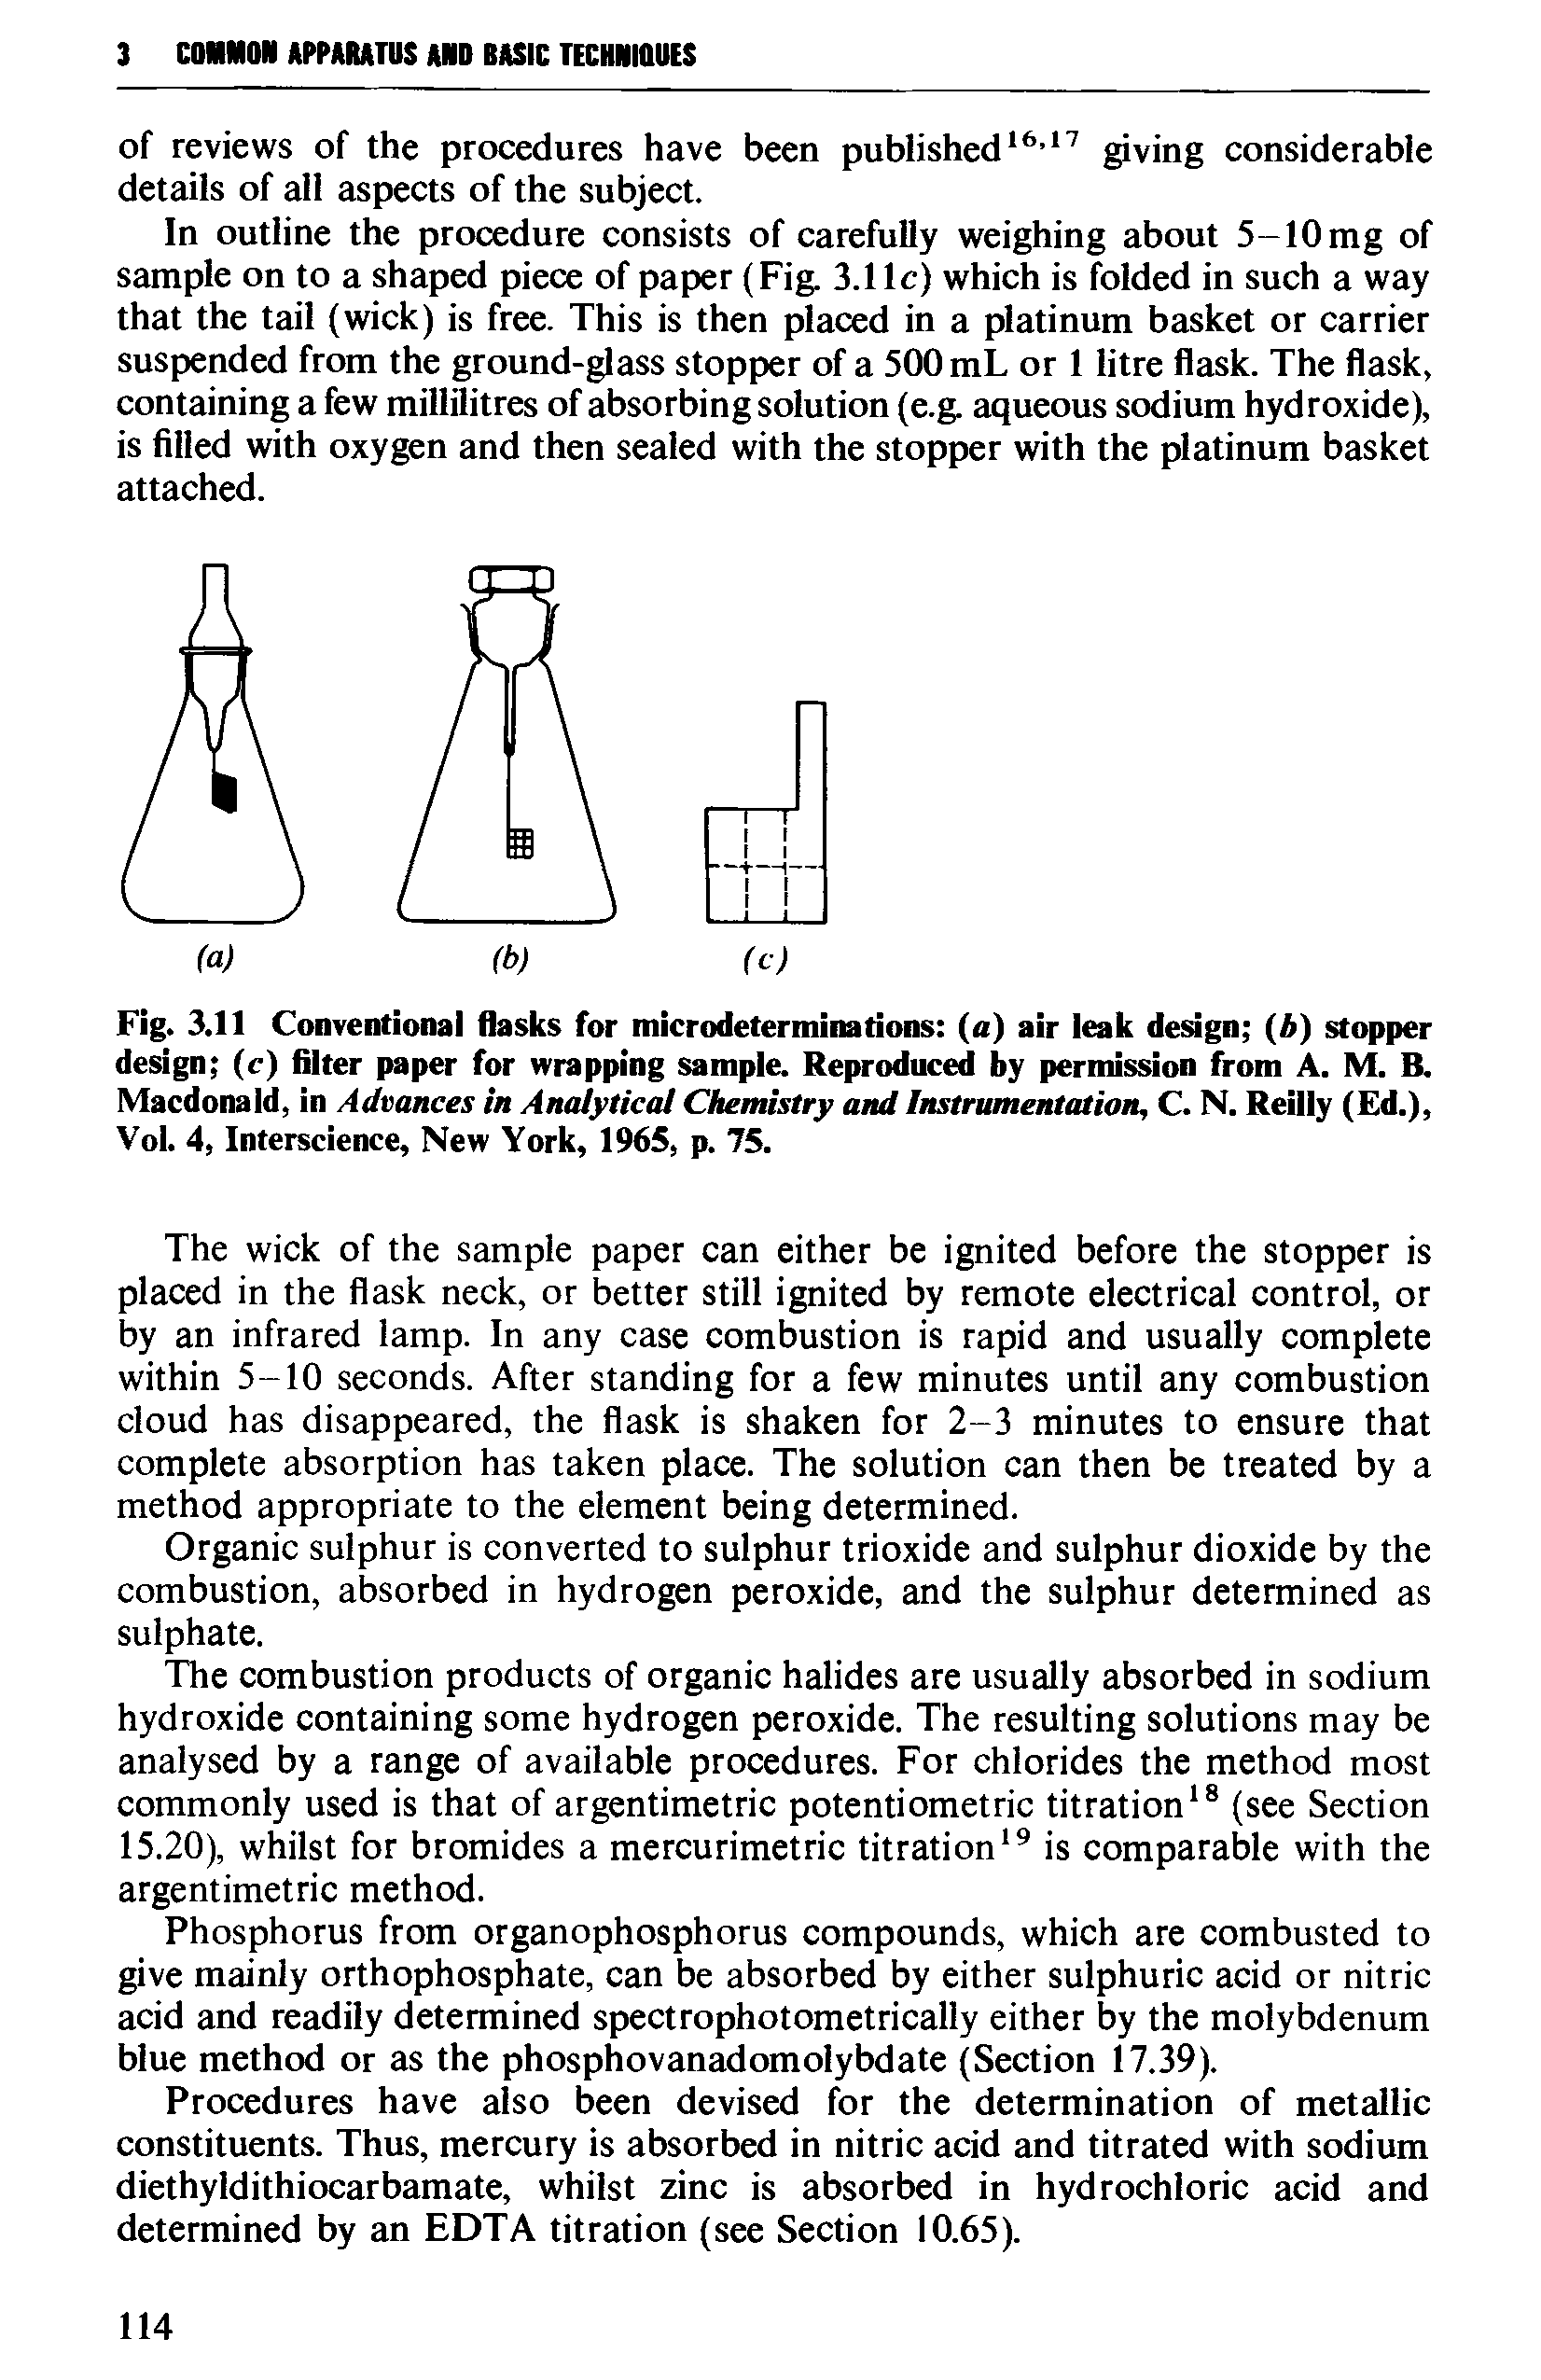 Fig. 3.11 Conventional flasks for microdeterminations (a) air leak design (A) stopper design (c) filter paper for wrapping sample. Reproduced by permission from A. M. B. Macdonald, in Advances in Analytical Chemistry and Instrumentation, C. N. Reilly (Ed.), Vol. 4, Interscience, New York, 1965, p. 75.